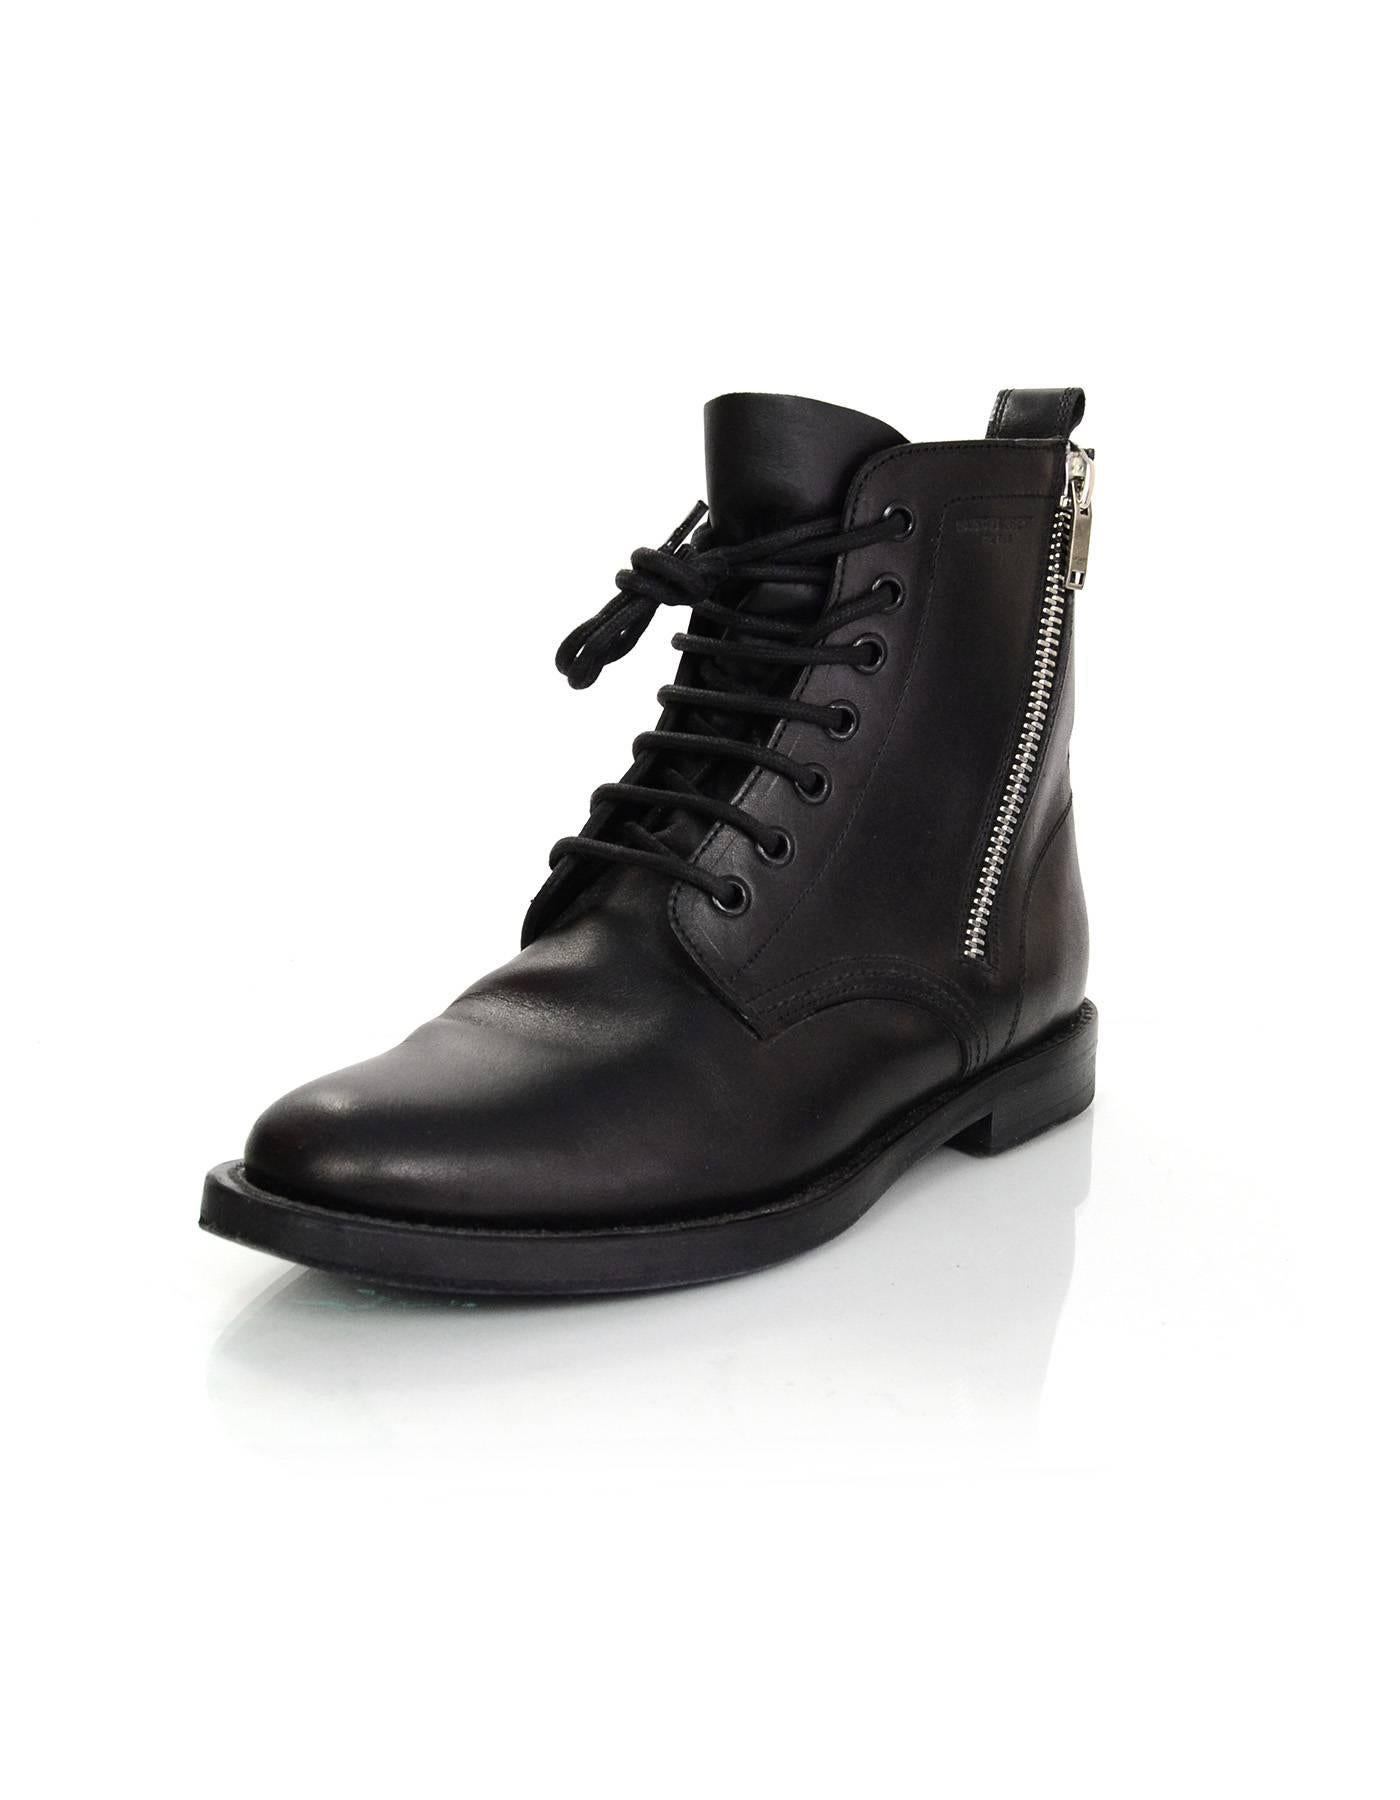 Saint Laurent Black Leather Combat Ankle Boots Sz 38.5
Features zippers at sides

Made In: Italy
Color: Black
Materials: Leather
Closure/Opening: Lace tie closure / side sip
Sole Stamp: Saint Laurent Paris 38.5
Retail Price: $1,295 + tax
Overall